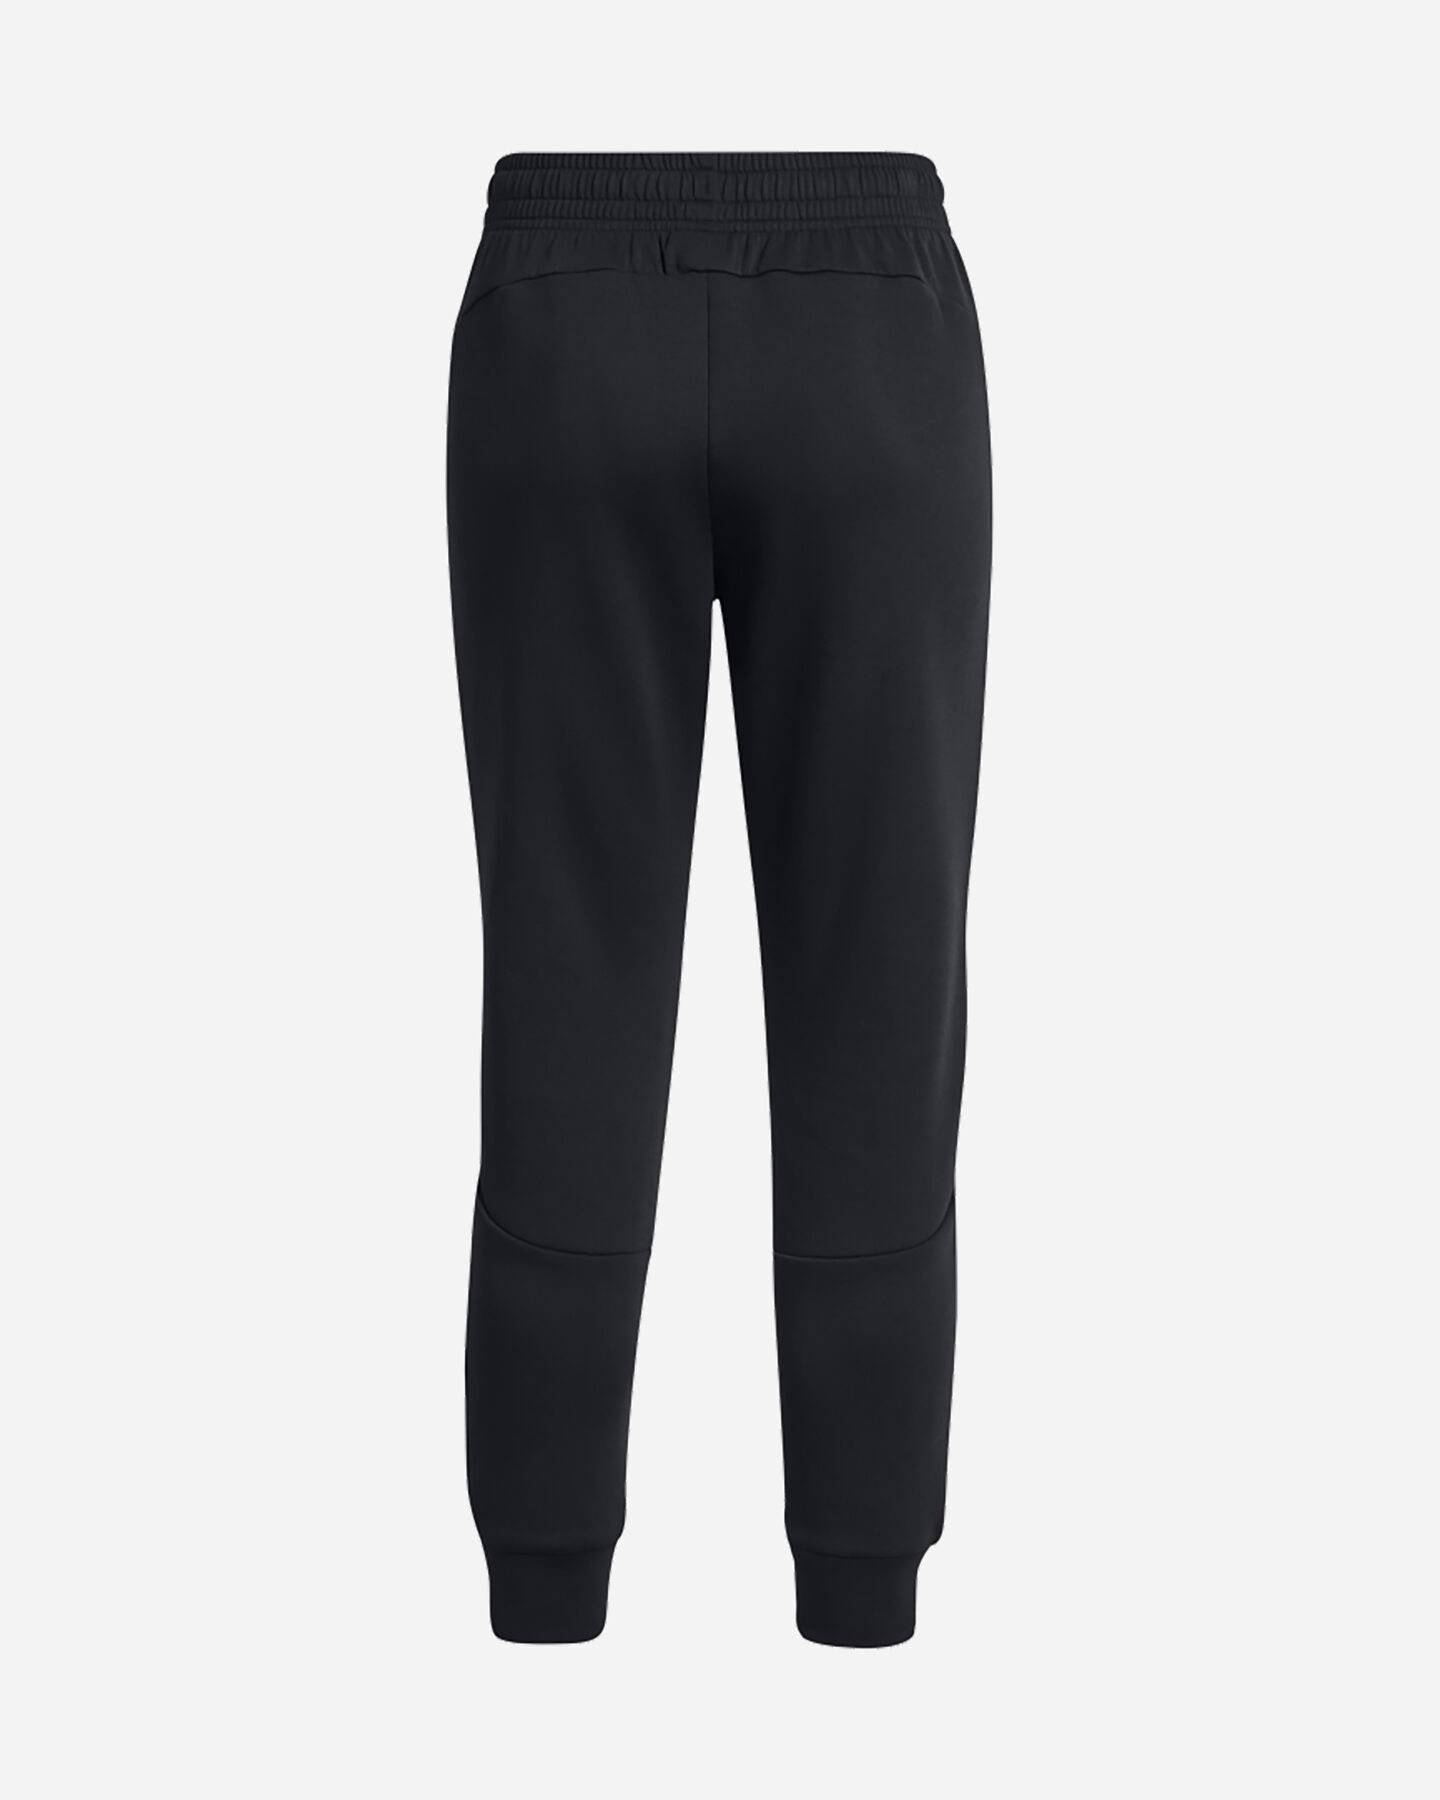  Pantalone UNDER ARMOUR UNSTOPPABLE FLC W S5579700|0001|XS scatto 1